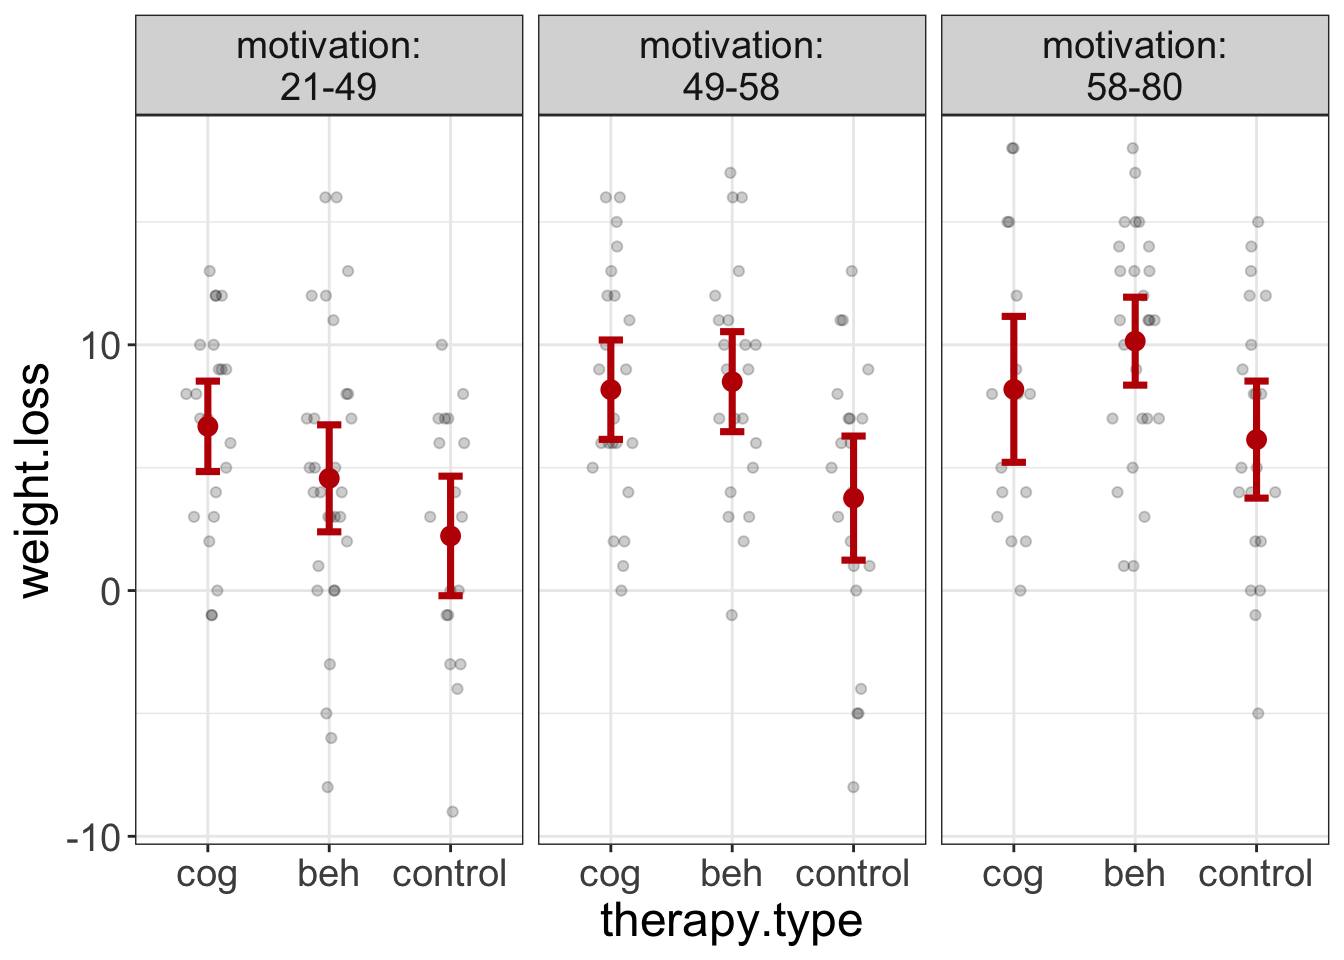 Plot of therapy group scores on weight loss for different levels of motivation.